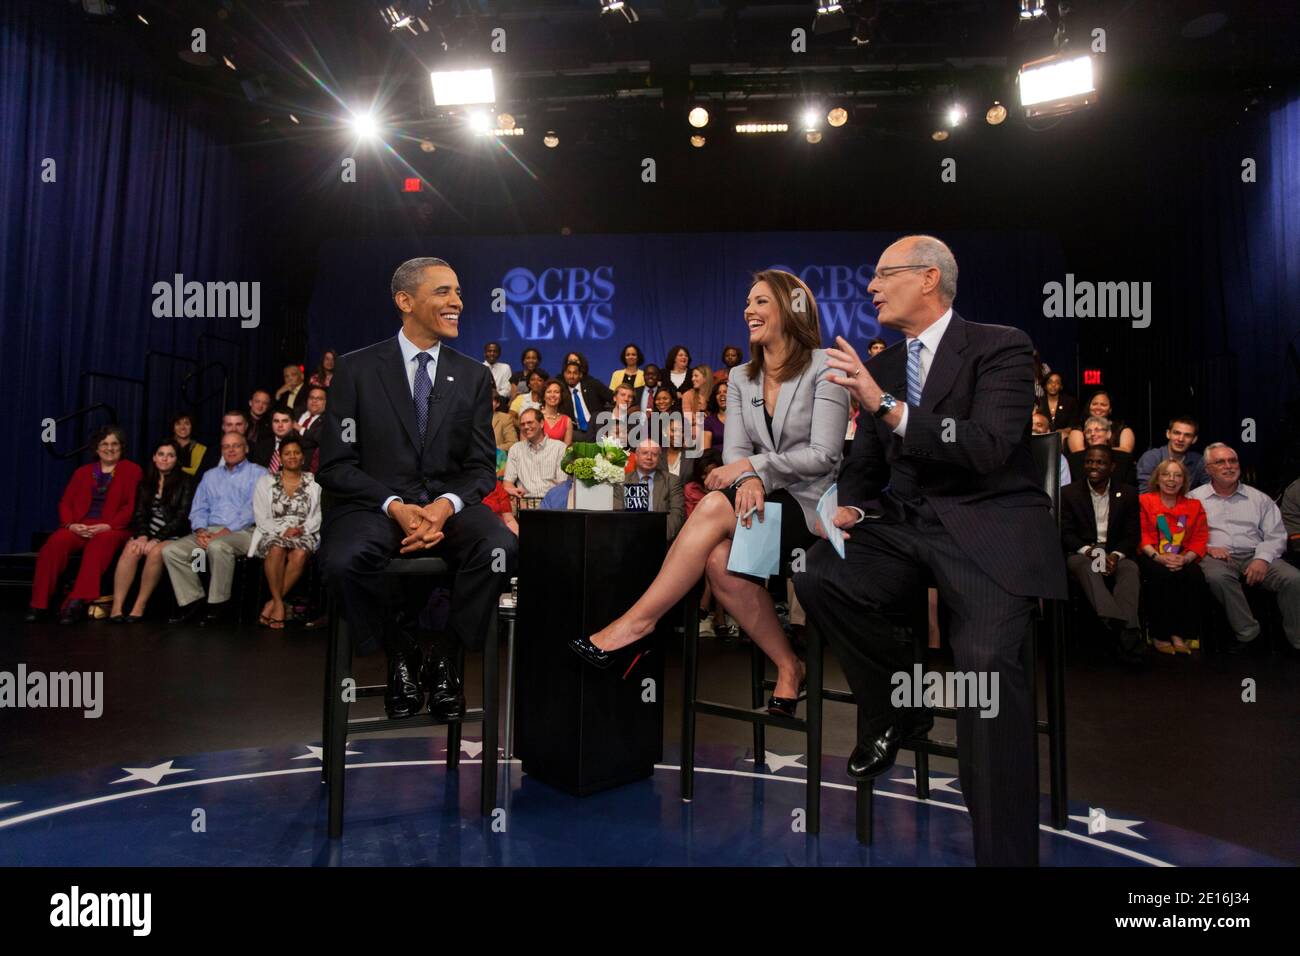 U.S. President Barack Obama, along with Early Show co-anchor Erica Hill (L) and CBS News correspondent Harry Smith (R), laugh during a pause in the taping of a CBS News Town Hall Meeting on the Economy at the Newseum in Washington, DC on May 11, 2011. Photo by Jim Lo Scalzo/Pool/ABACAPRESS.COM Stock Photo